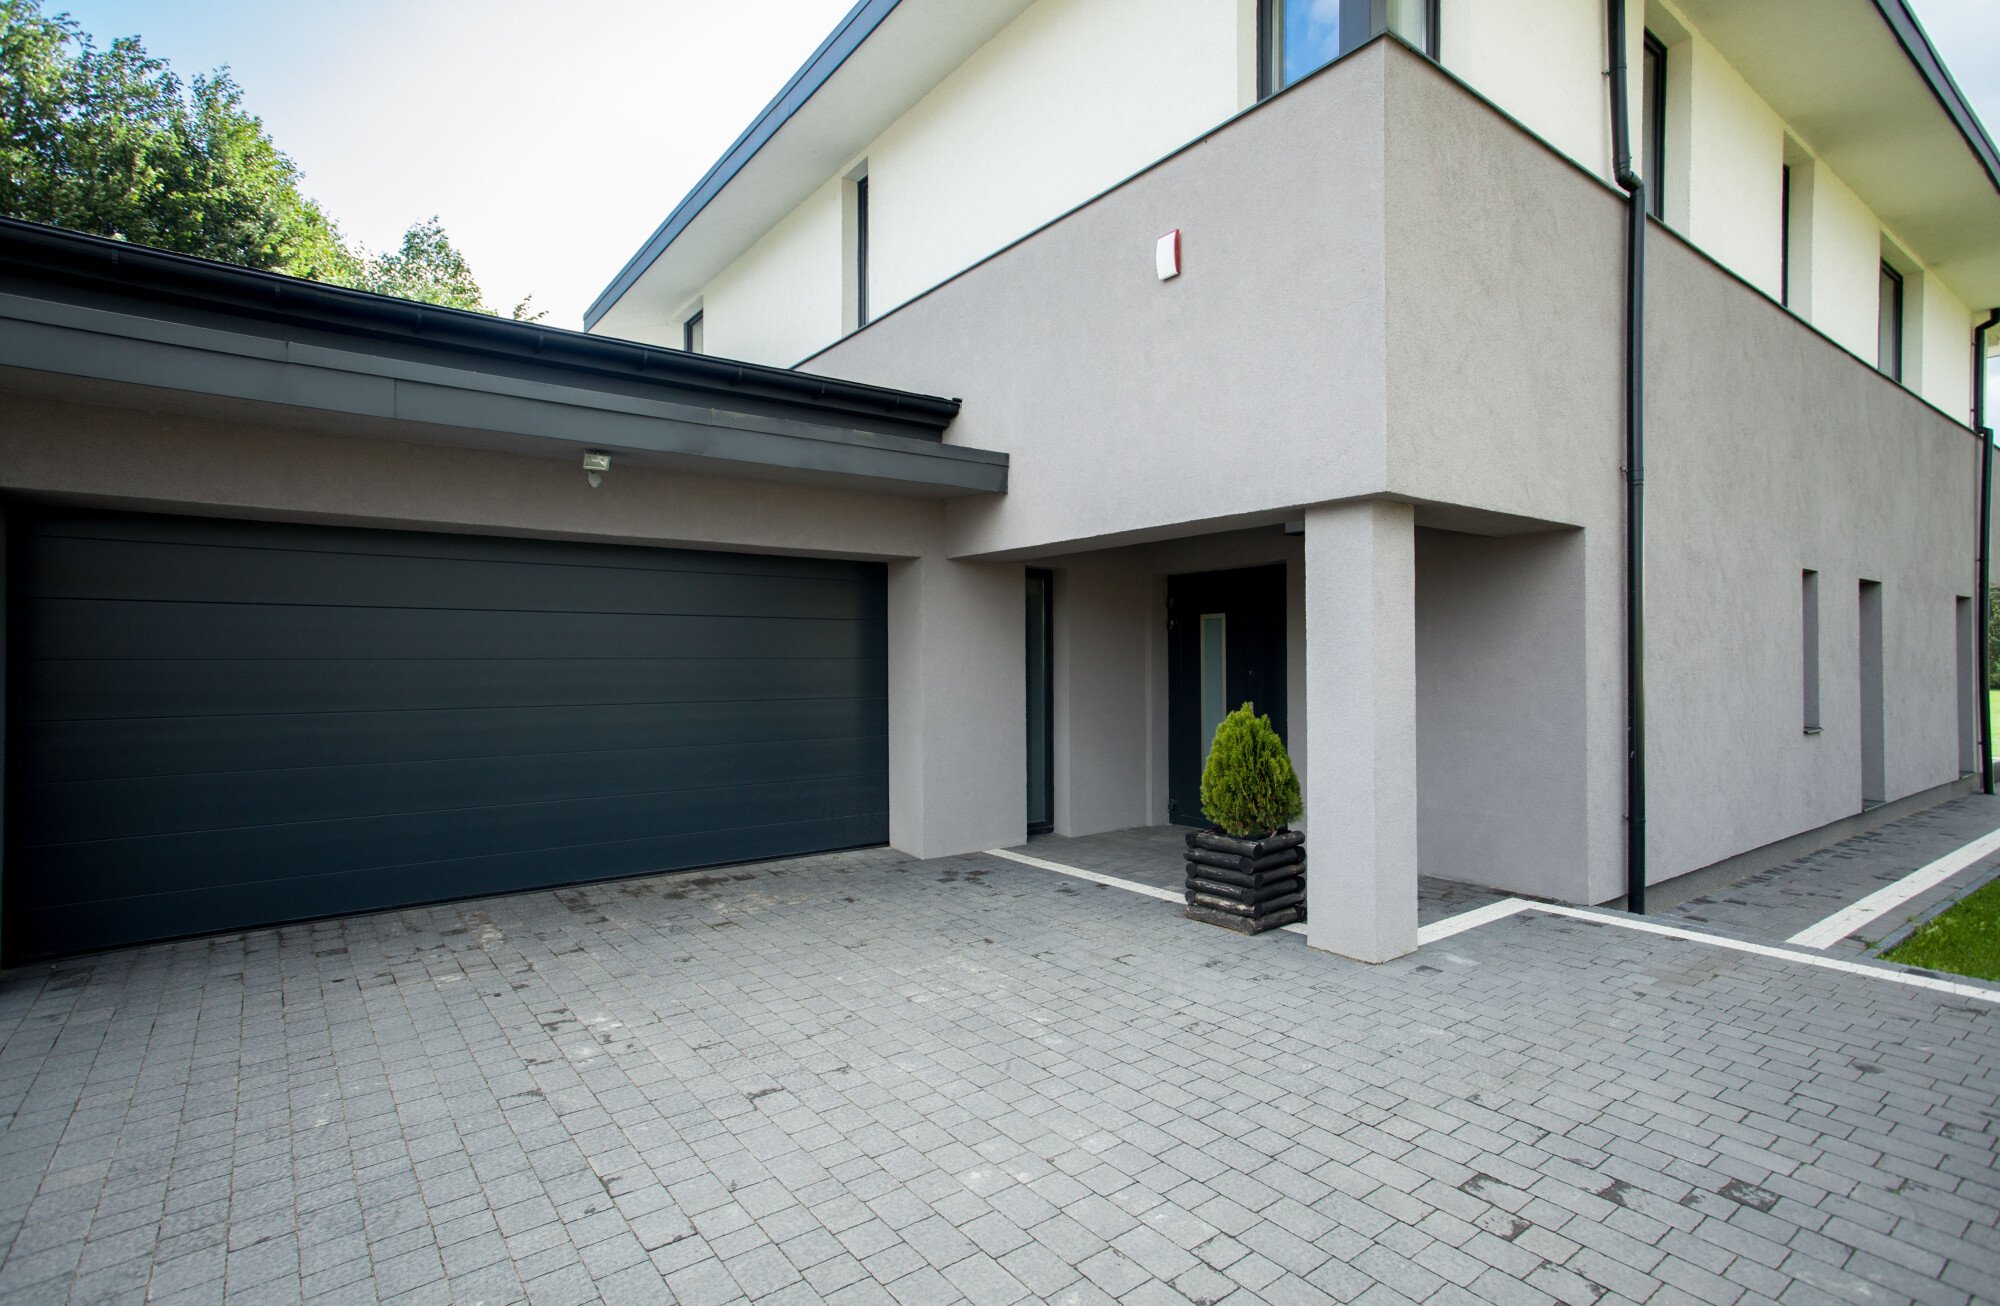 Unlock the future with modern garage doors. Discover seven compelling reasons why these innovative doors are essential for your home.